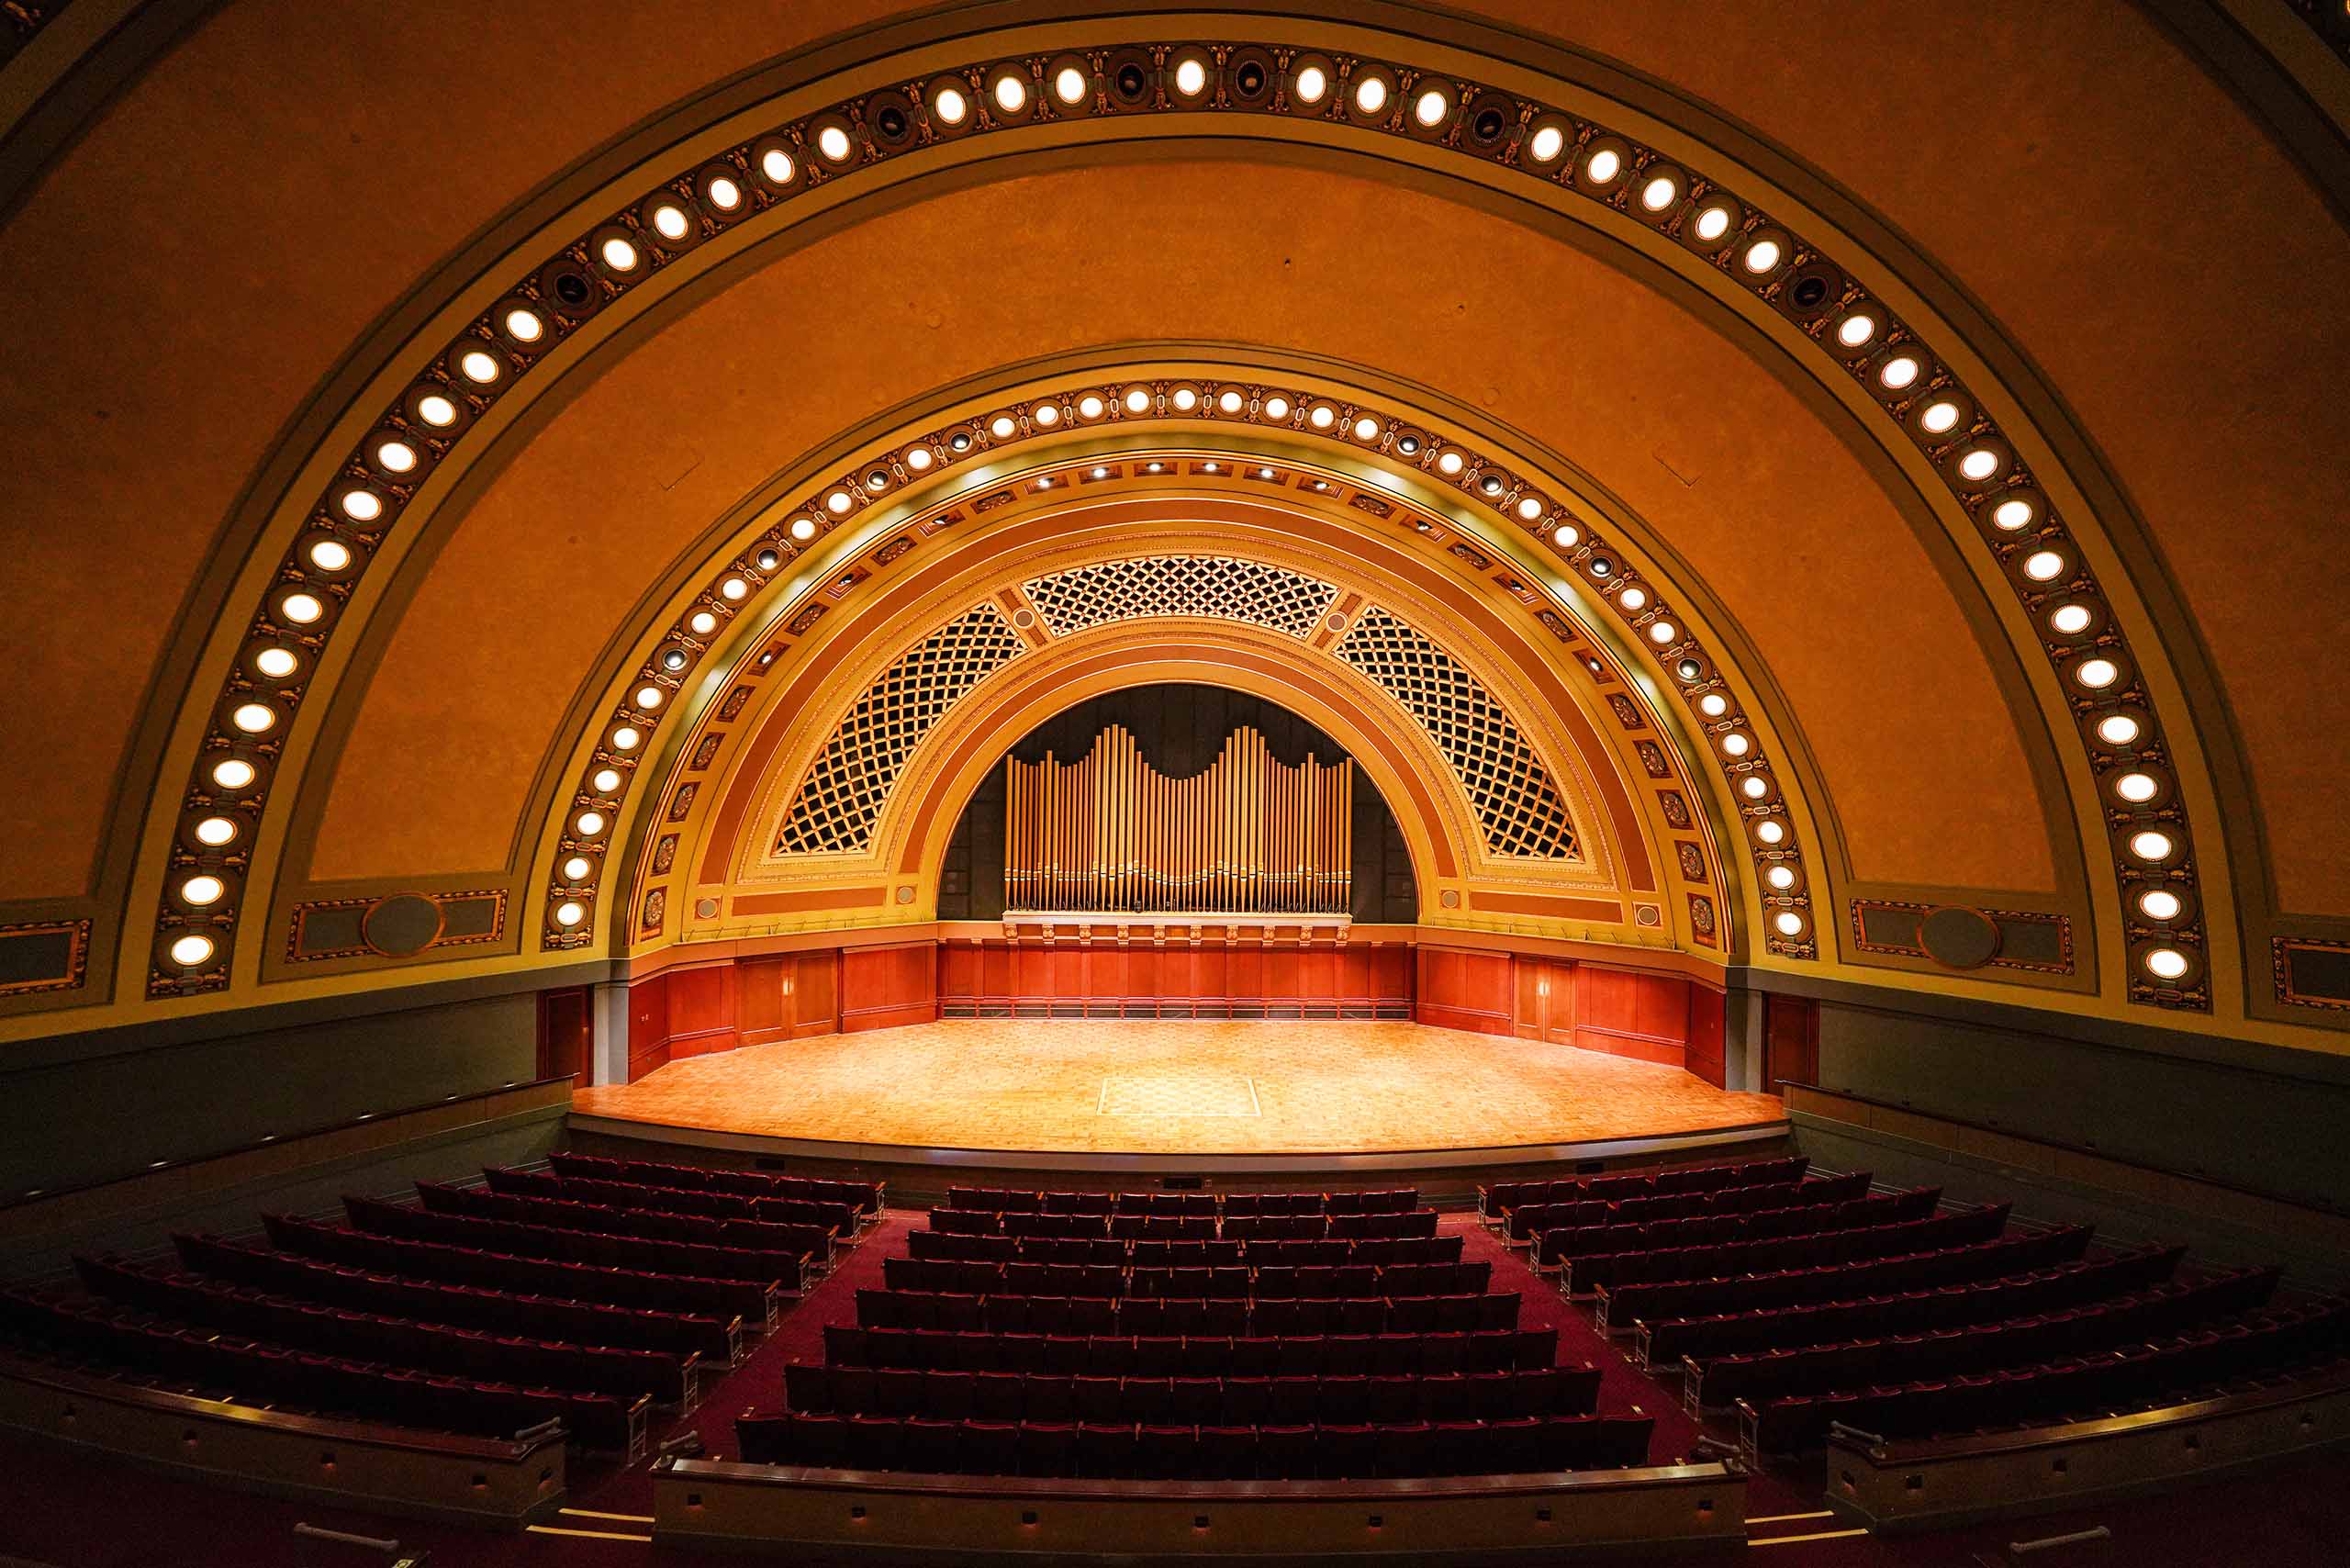 Lit Hill Auditorium stage with organ pipes at back wall and parabolic ceiling rising above